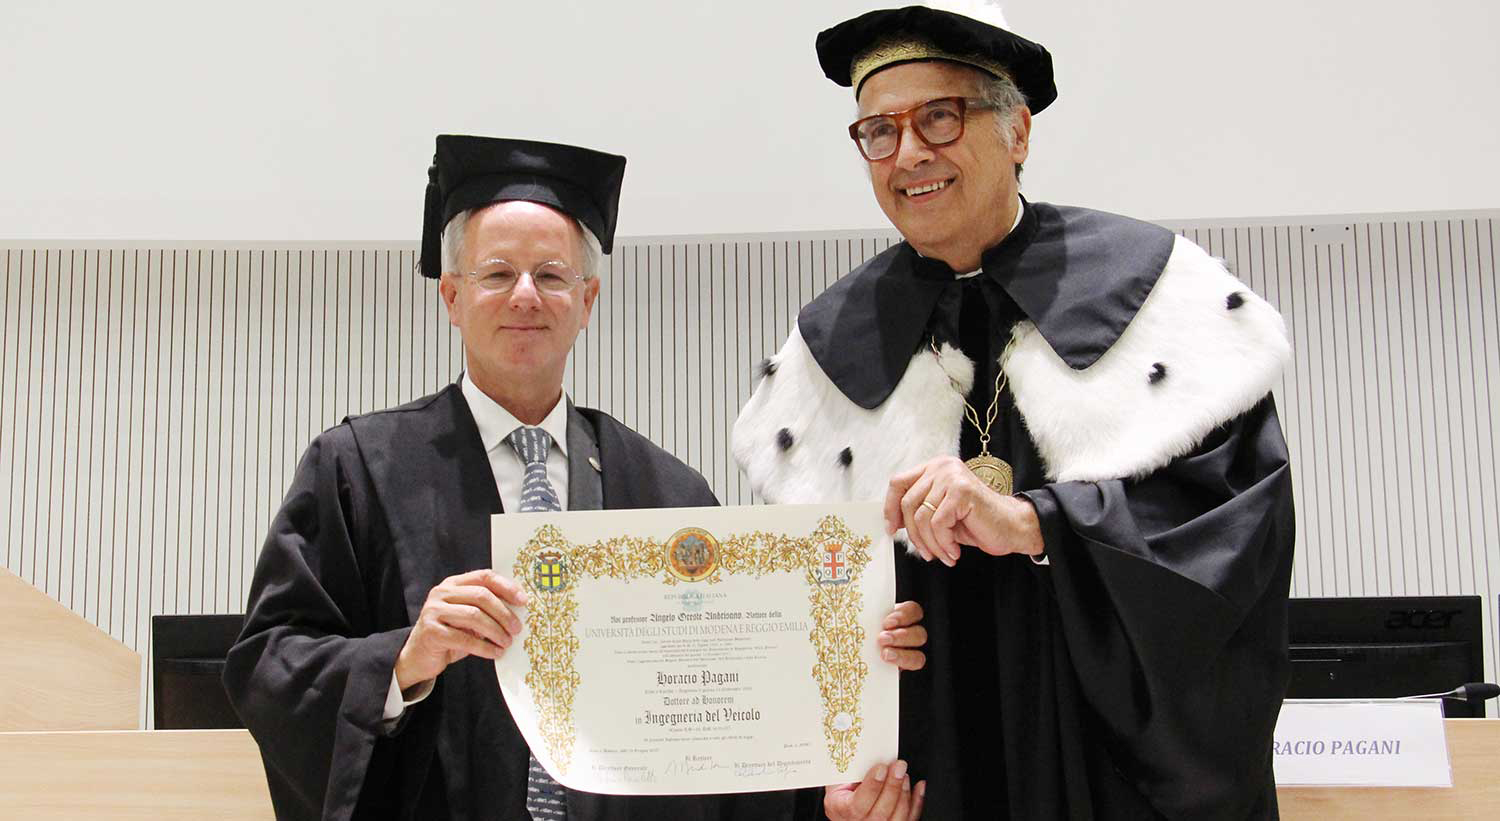 Unimore: Horacio Pagani receives an honorary degree in Vehicle Engineering.